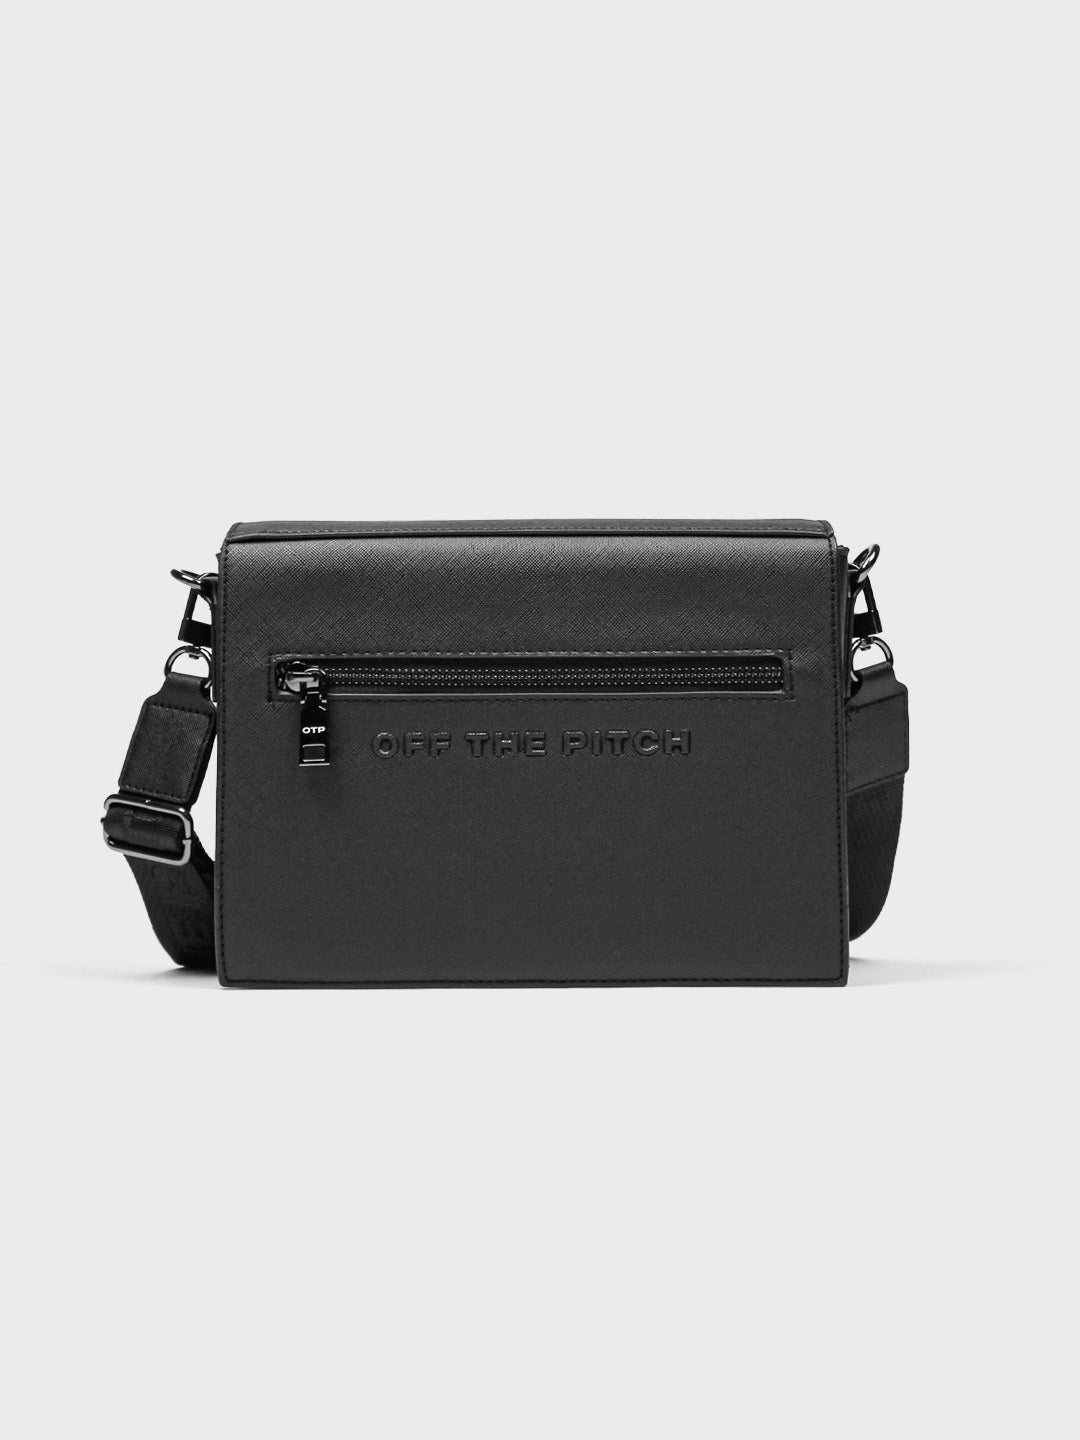 off the pitch cyber messenger bag